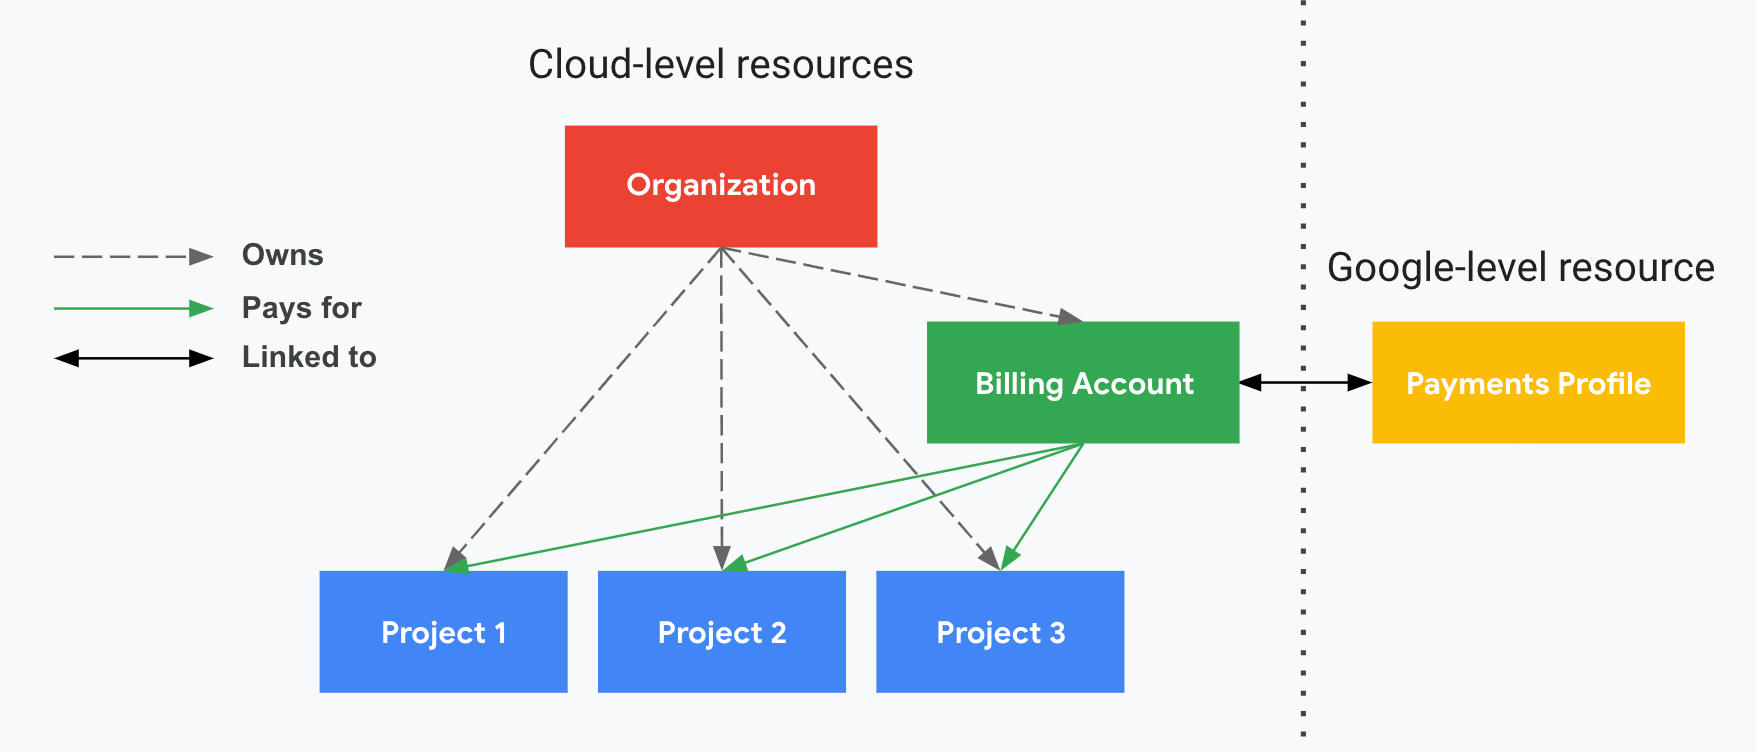 Describes how projects relate to your Cloud Billing account,
         the organization, and your payments profile. One side shows your
         Cloud-level resources (organization, Cloud Billing account and
         associated projects) and the other side, divided by a vertical dotted
         line, shows your Google-level resource (a payments profile). Your
         projects are paid for by your Cloud Billing account, which is
         linked to your payments profile. The organization controls ownership
         using IAM.